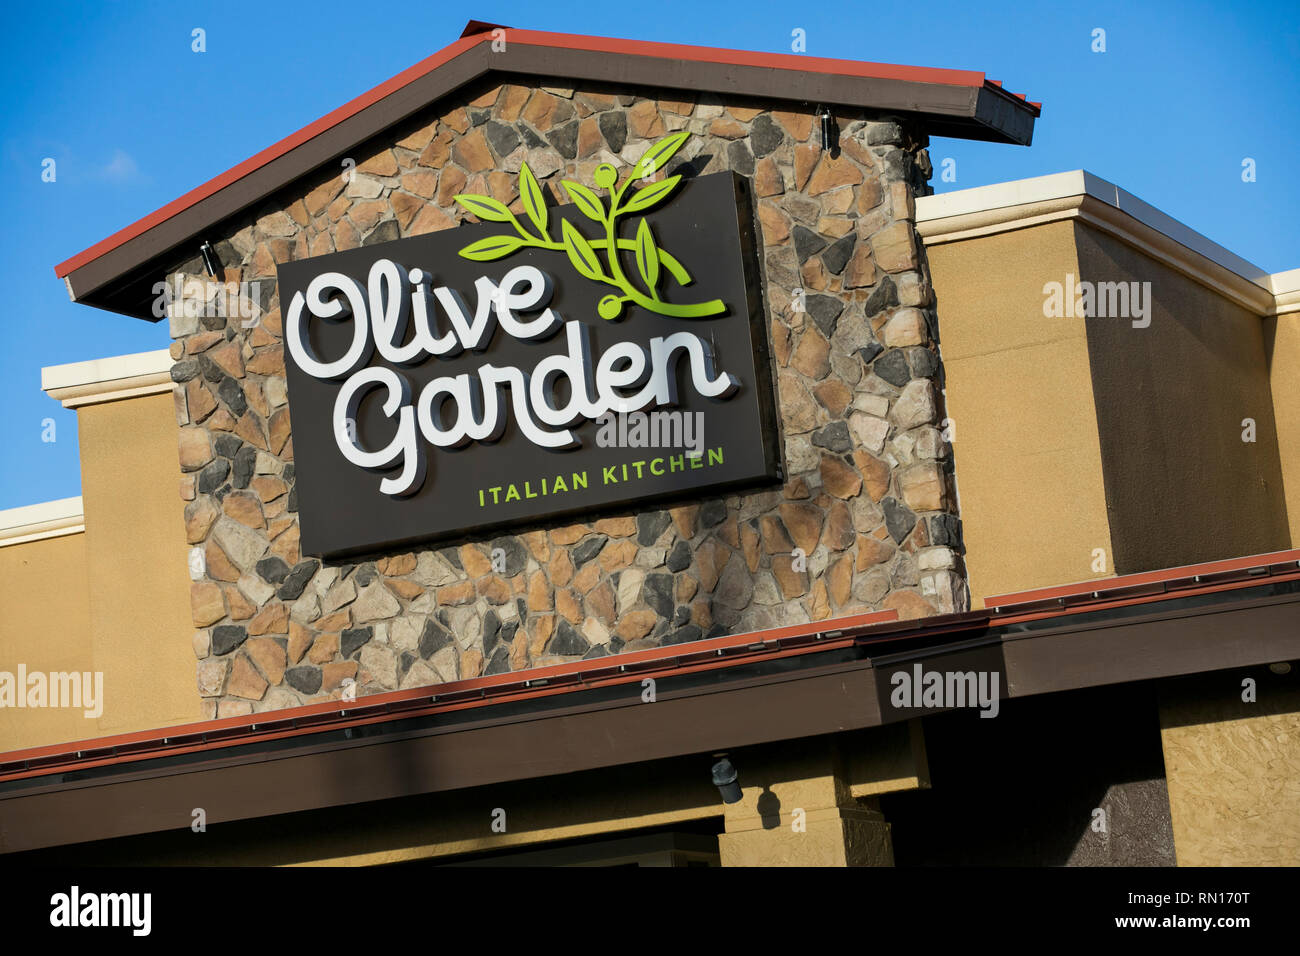 A logo sign outside of a Olive Garden restaurant location in Harrisburg, Pennsylvania on February 9, 2019. Stock Photo